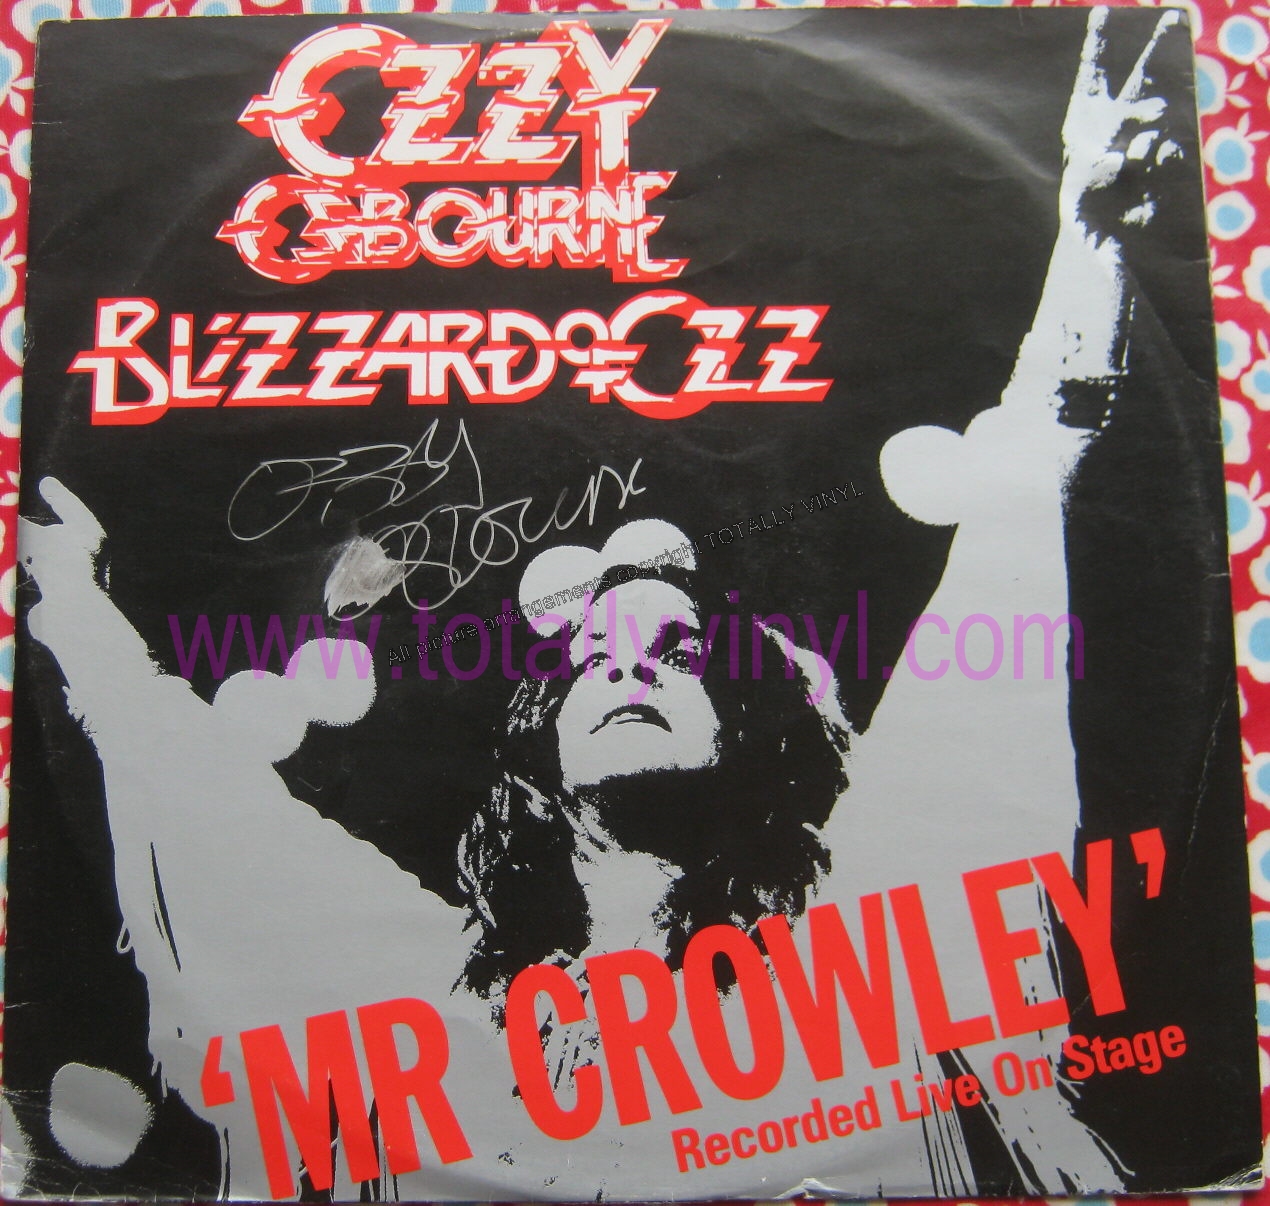 Totally Vinyl Records Osbourne Blizzard Of Ozz Ozzy Mr Crowley Specially Recorded Live Version You Said It All Suicide Solution 12 Inch Autographed